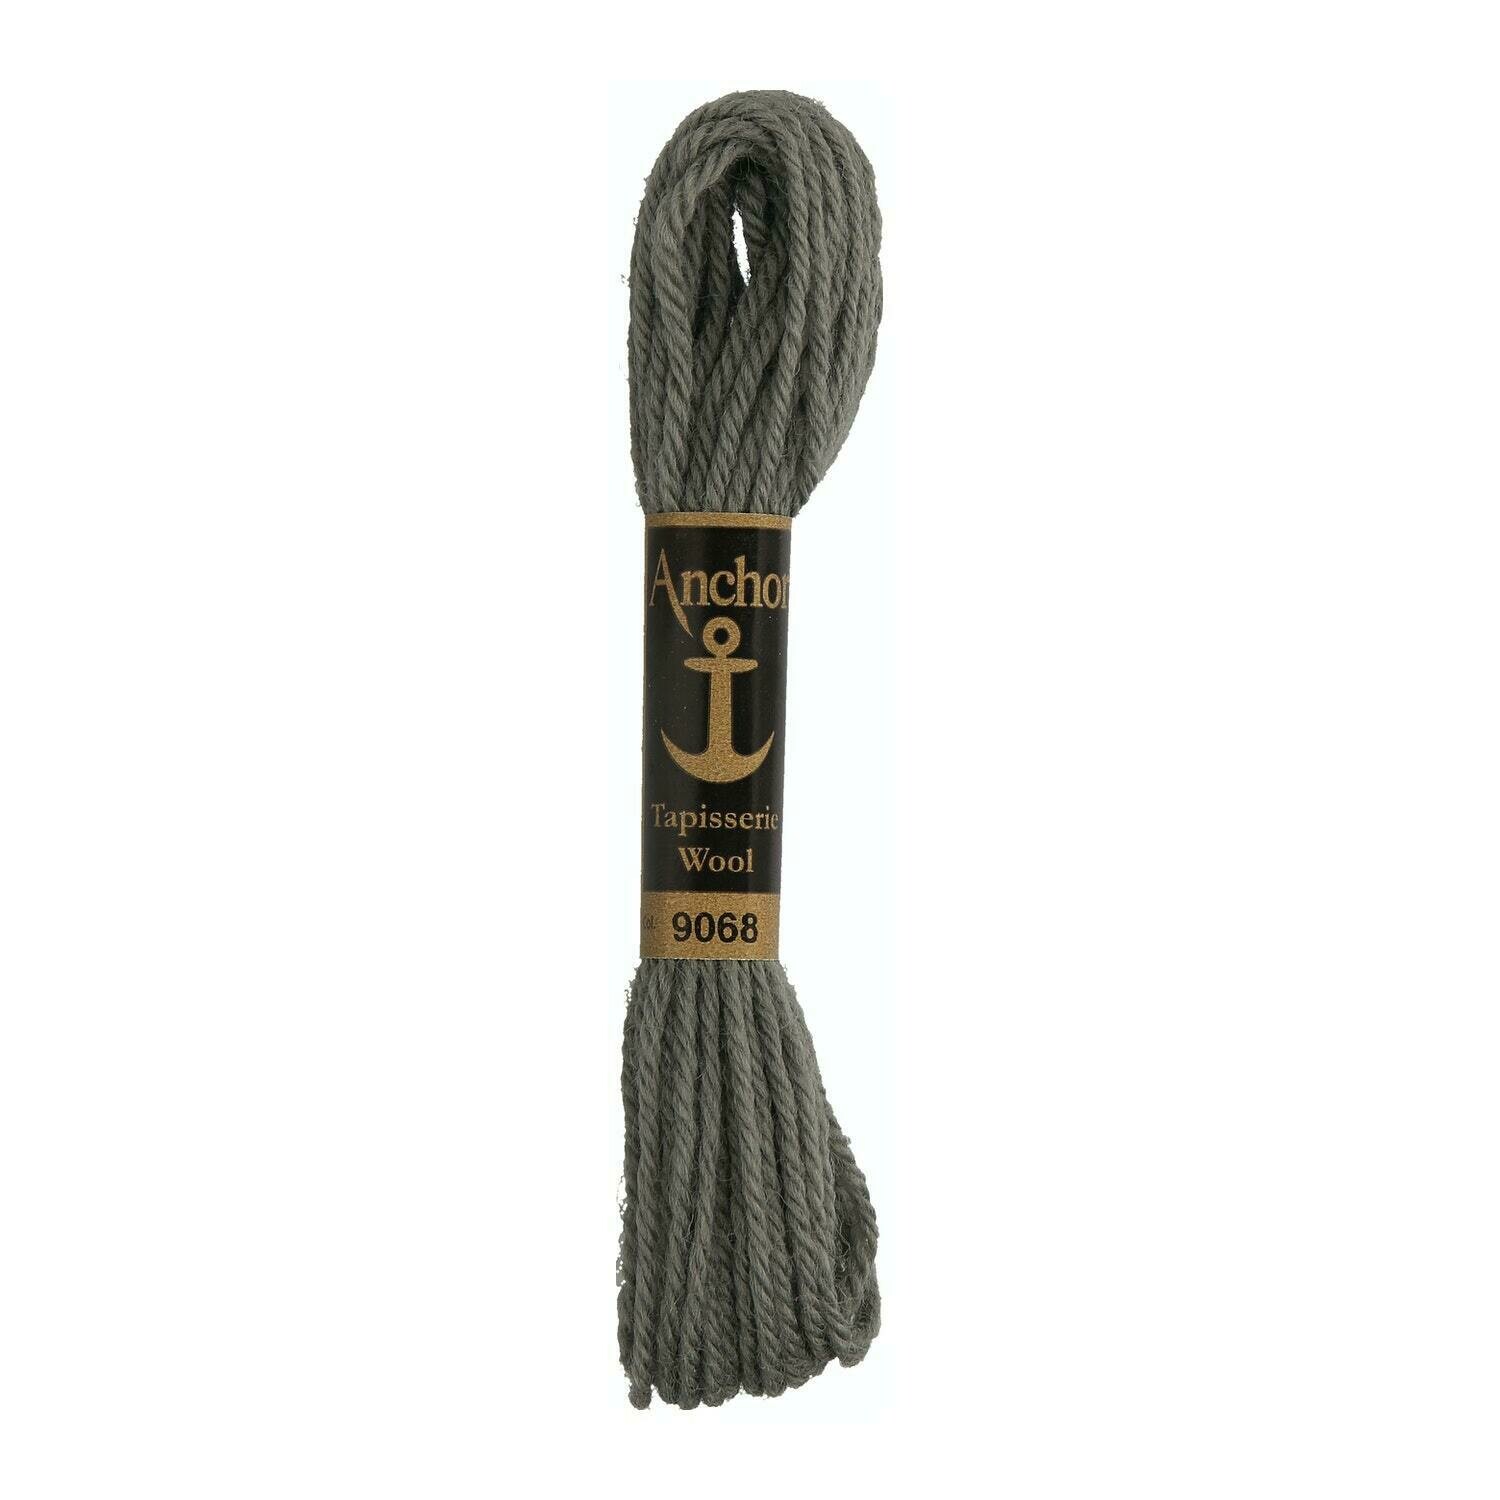 Anchor Tapisserie Wool #09068